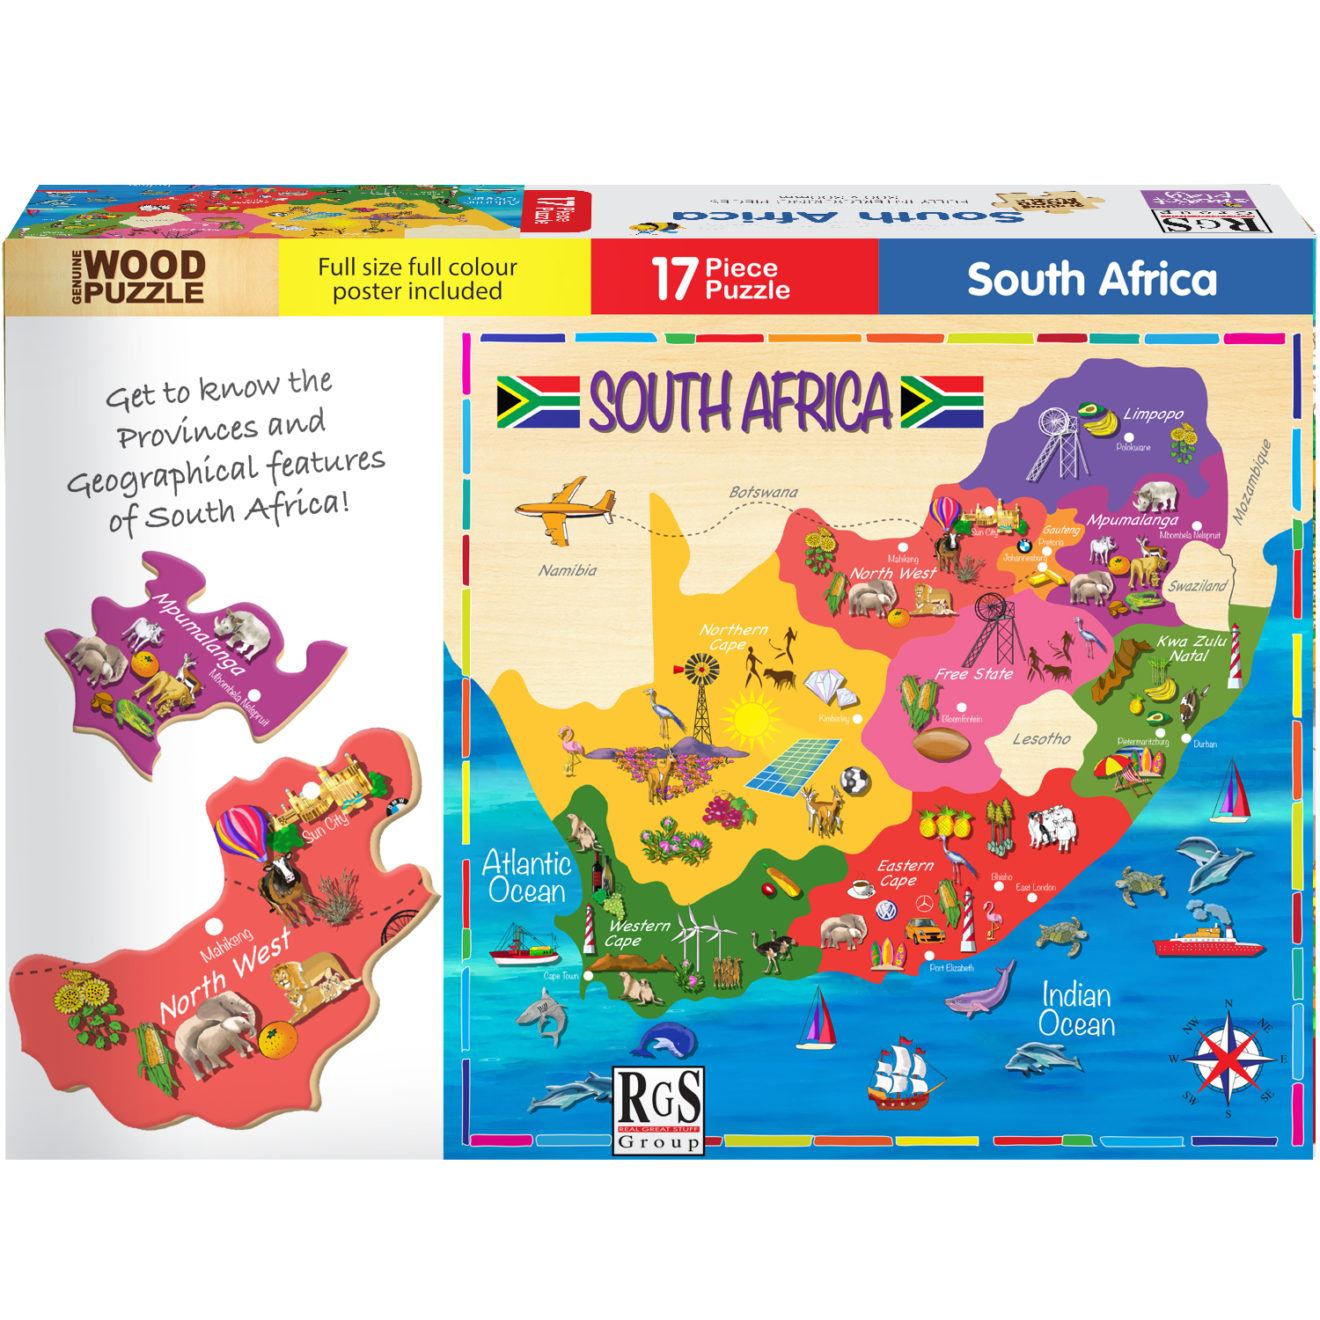 1651 South Africa Map Box 1320x1320 